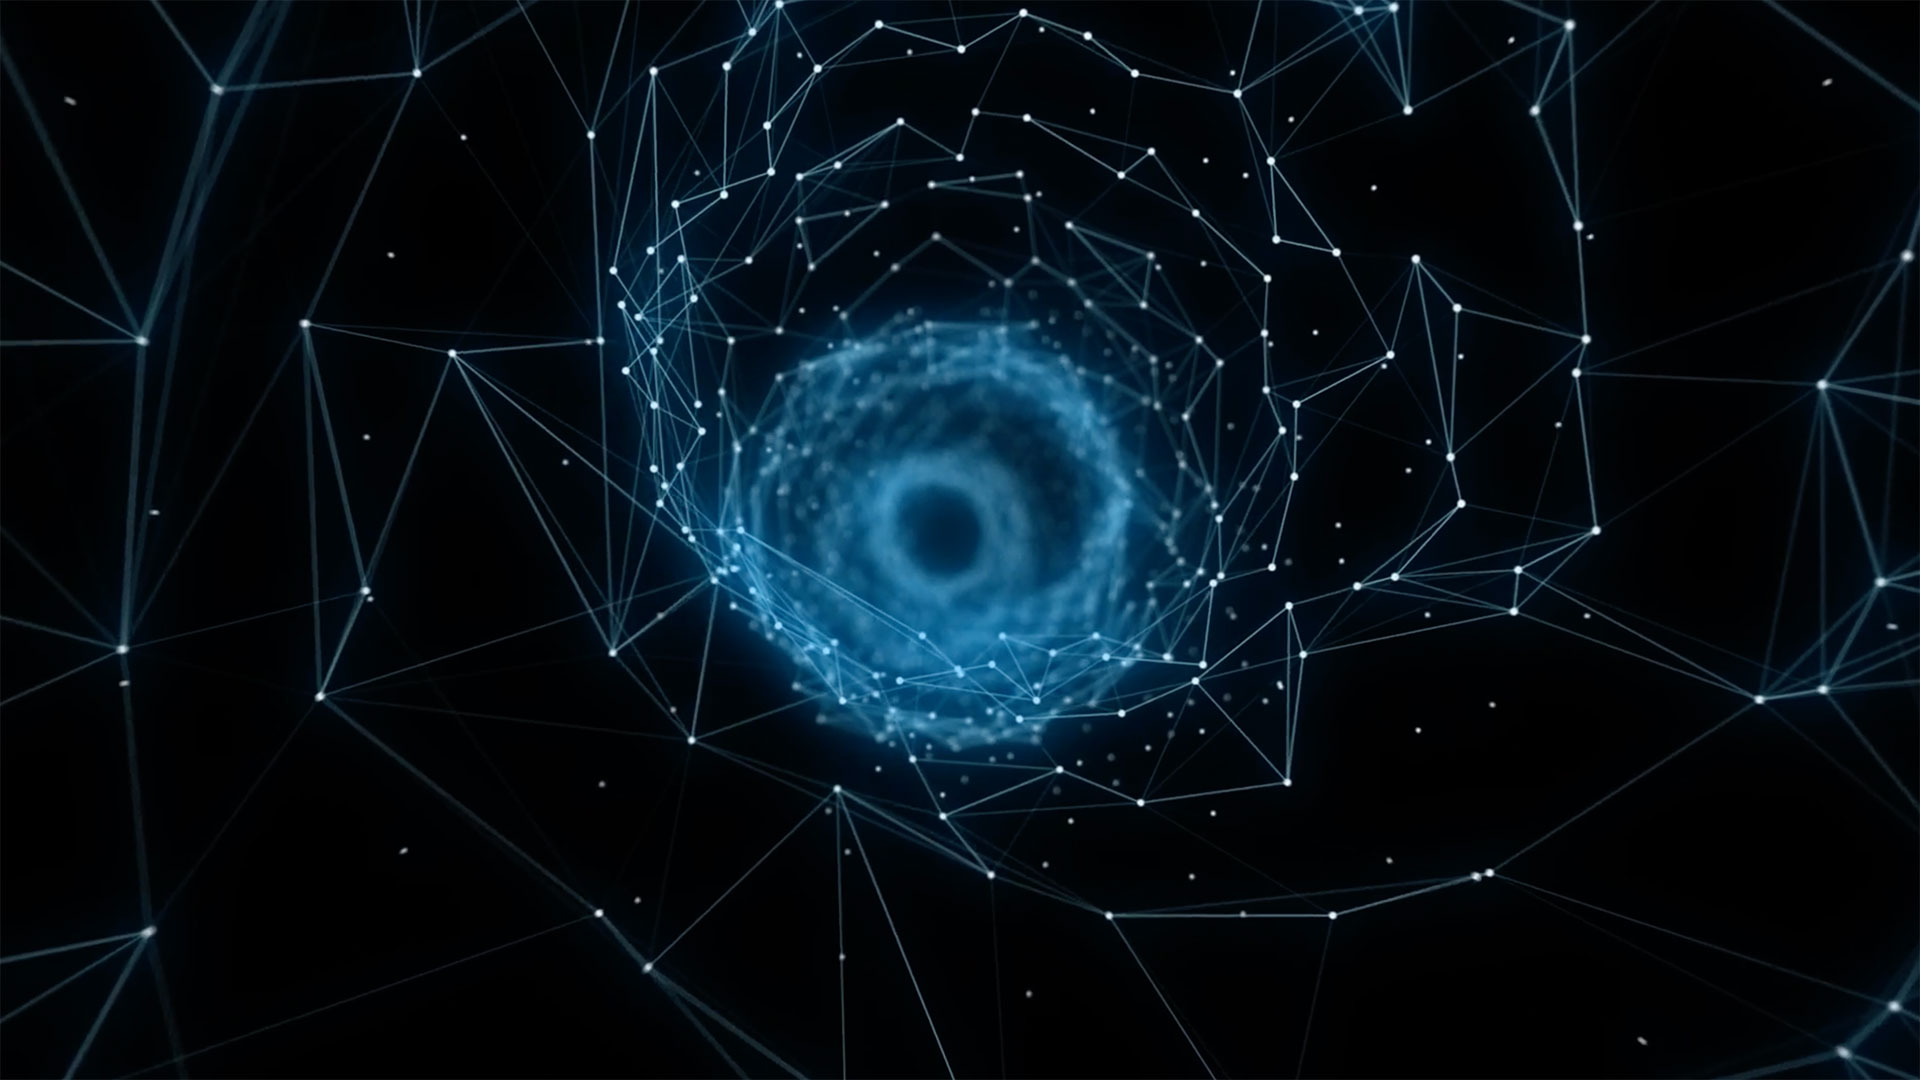 three emerging styles of motion graphics